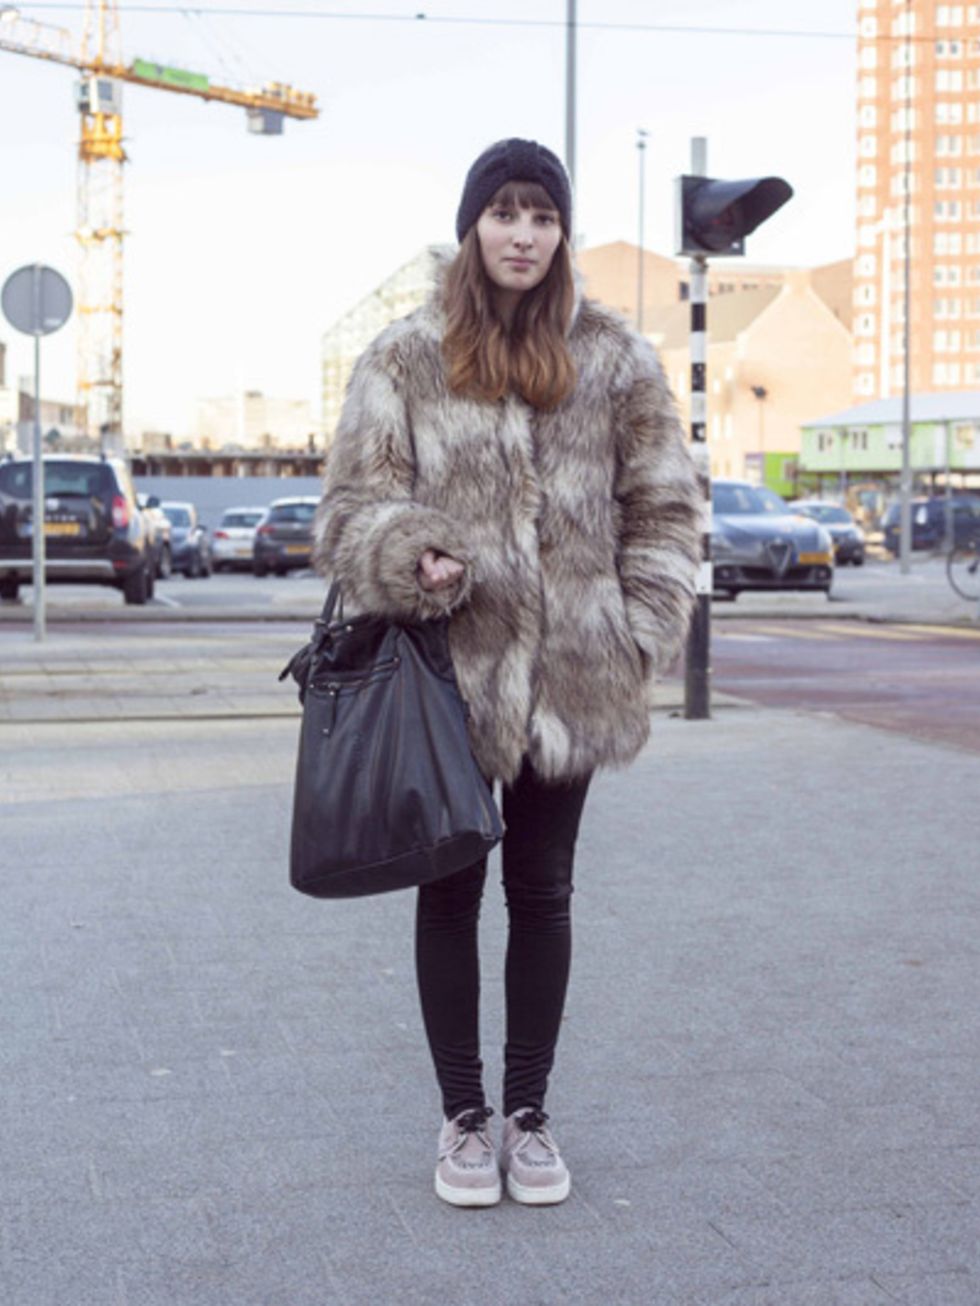 Clothing, Textile, Outerwear, Winter, Style, Fur clothing, Fashion accessory, Street fashion, Street, Fashion, 